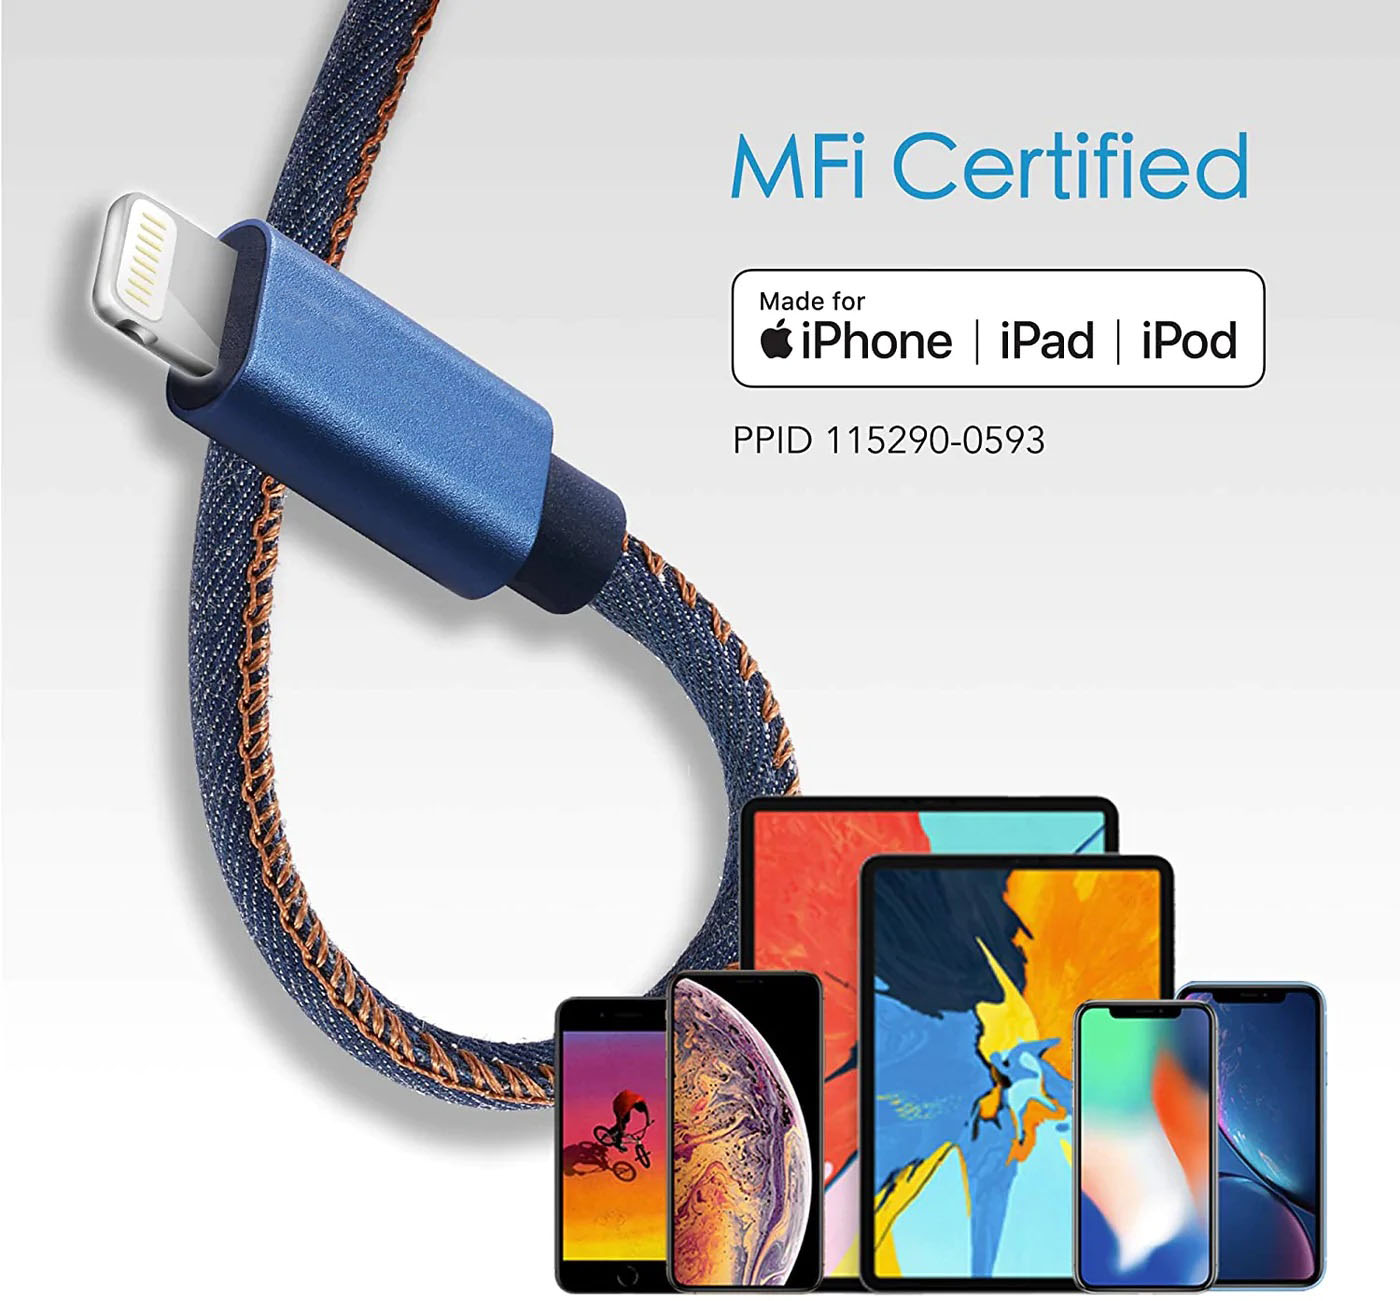 5. Denim Jean Lightning to USB type C Cable detailed information by Union Power America Inc. - Union Power (Yangzhou)Co., Ltd. Bulk Purchase and Corporate purchase contact us today(Slide Show)